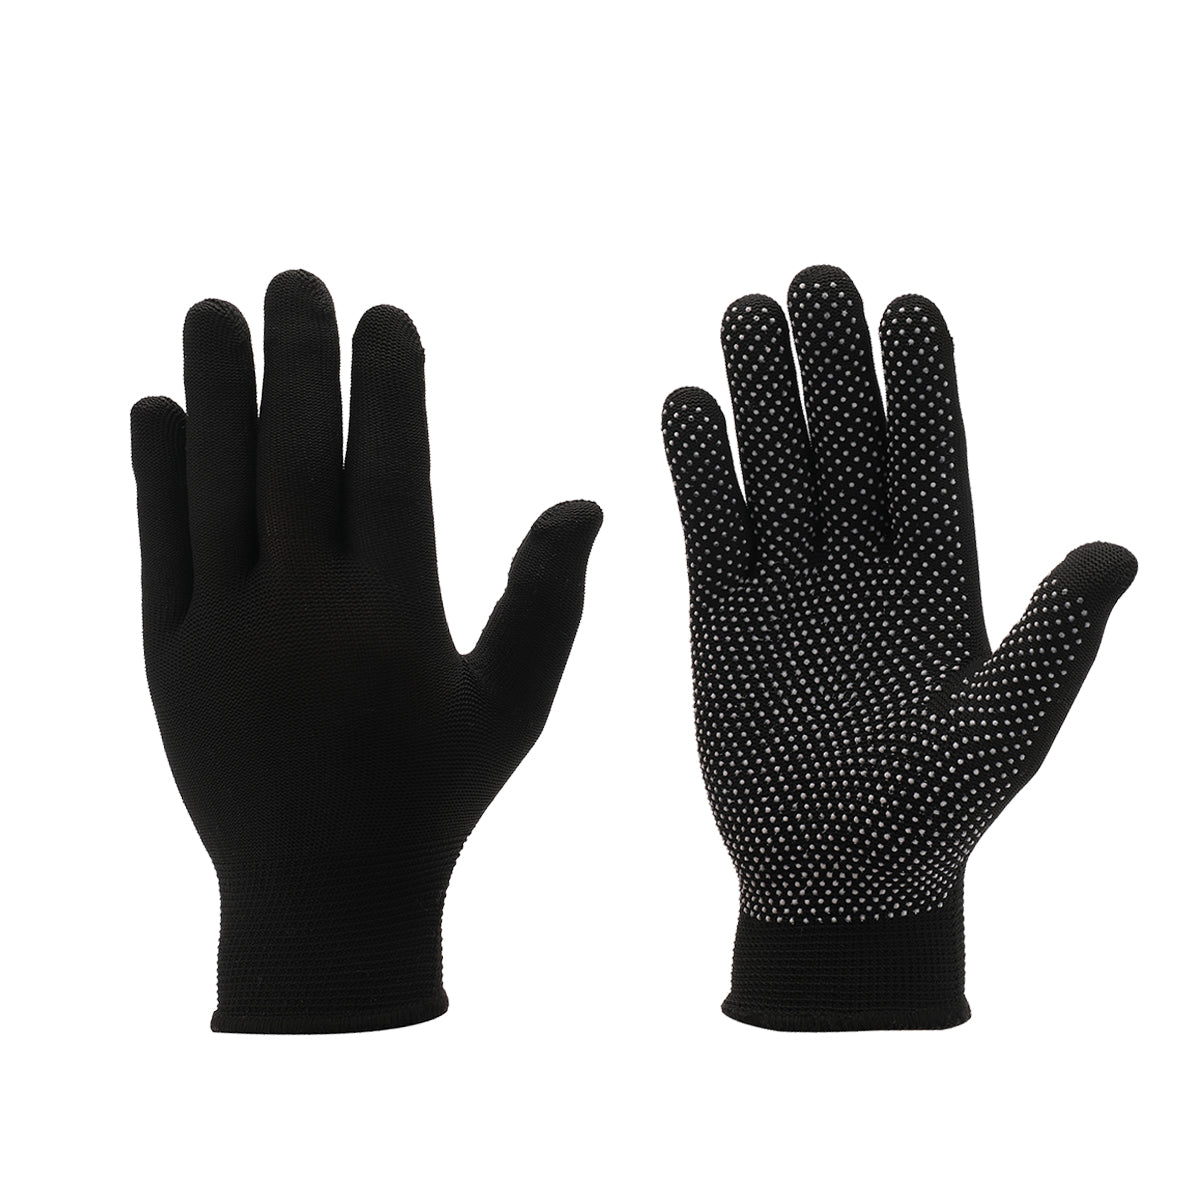 4-Pairs Black Dotted Gloves